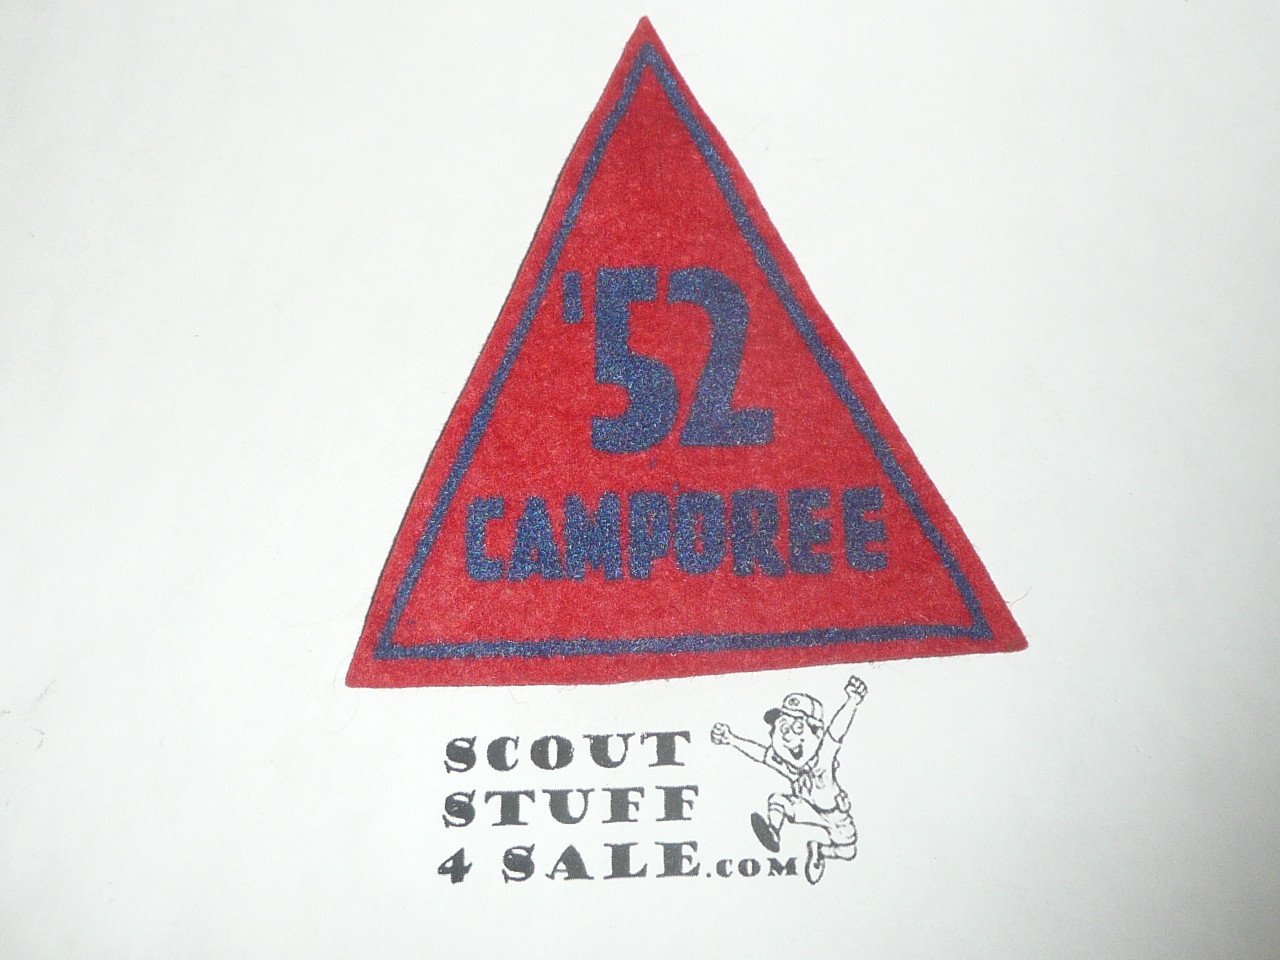 1952 Camporee Patch, Generic BSA issue, red felt